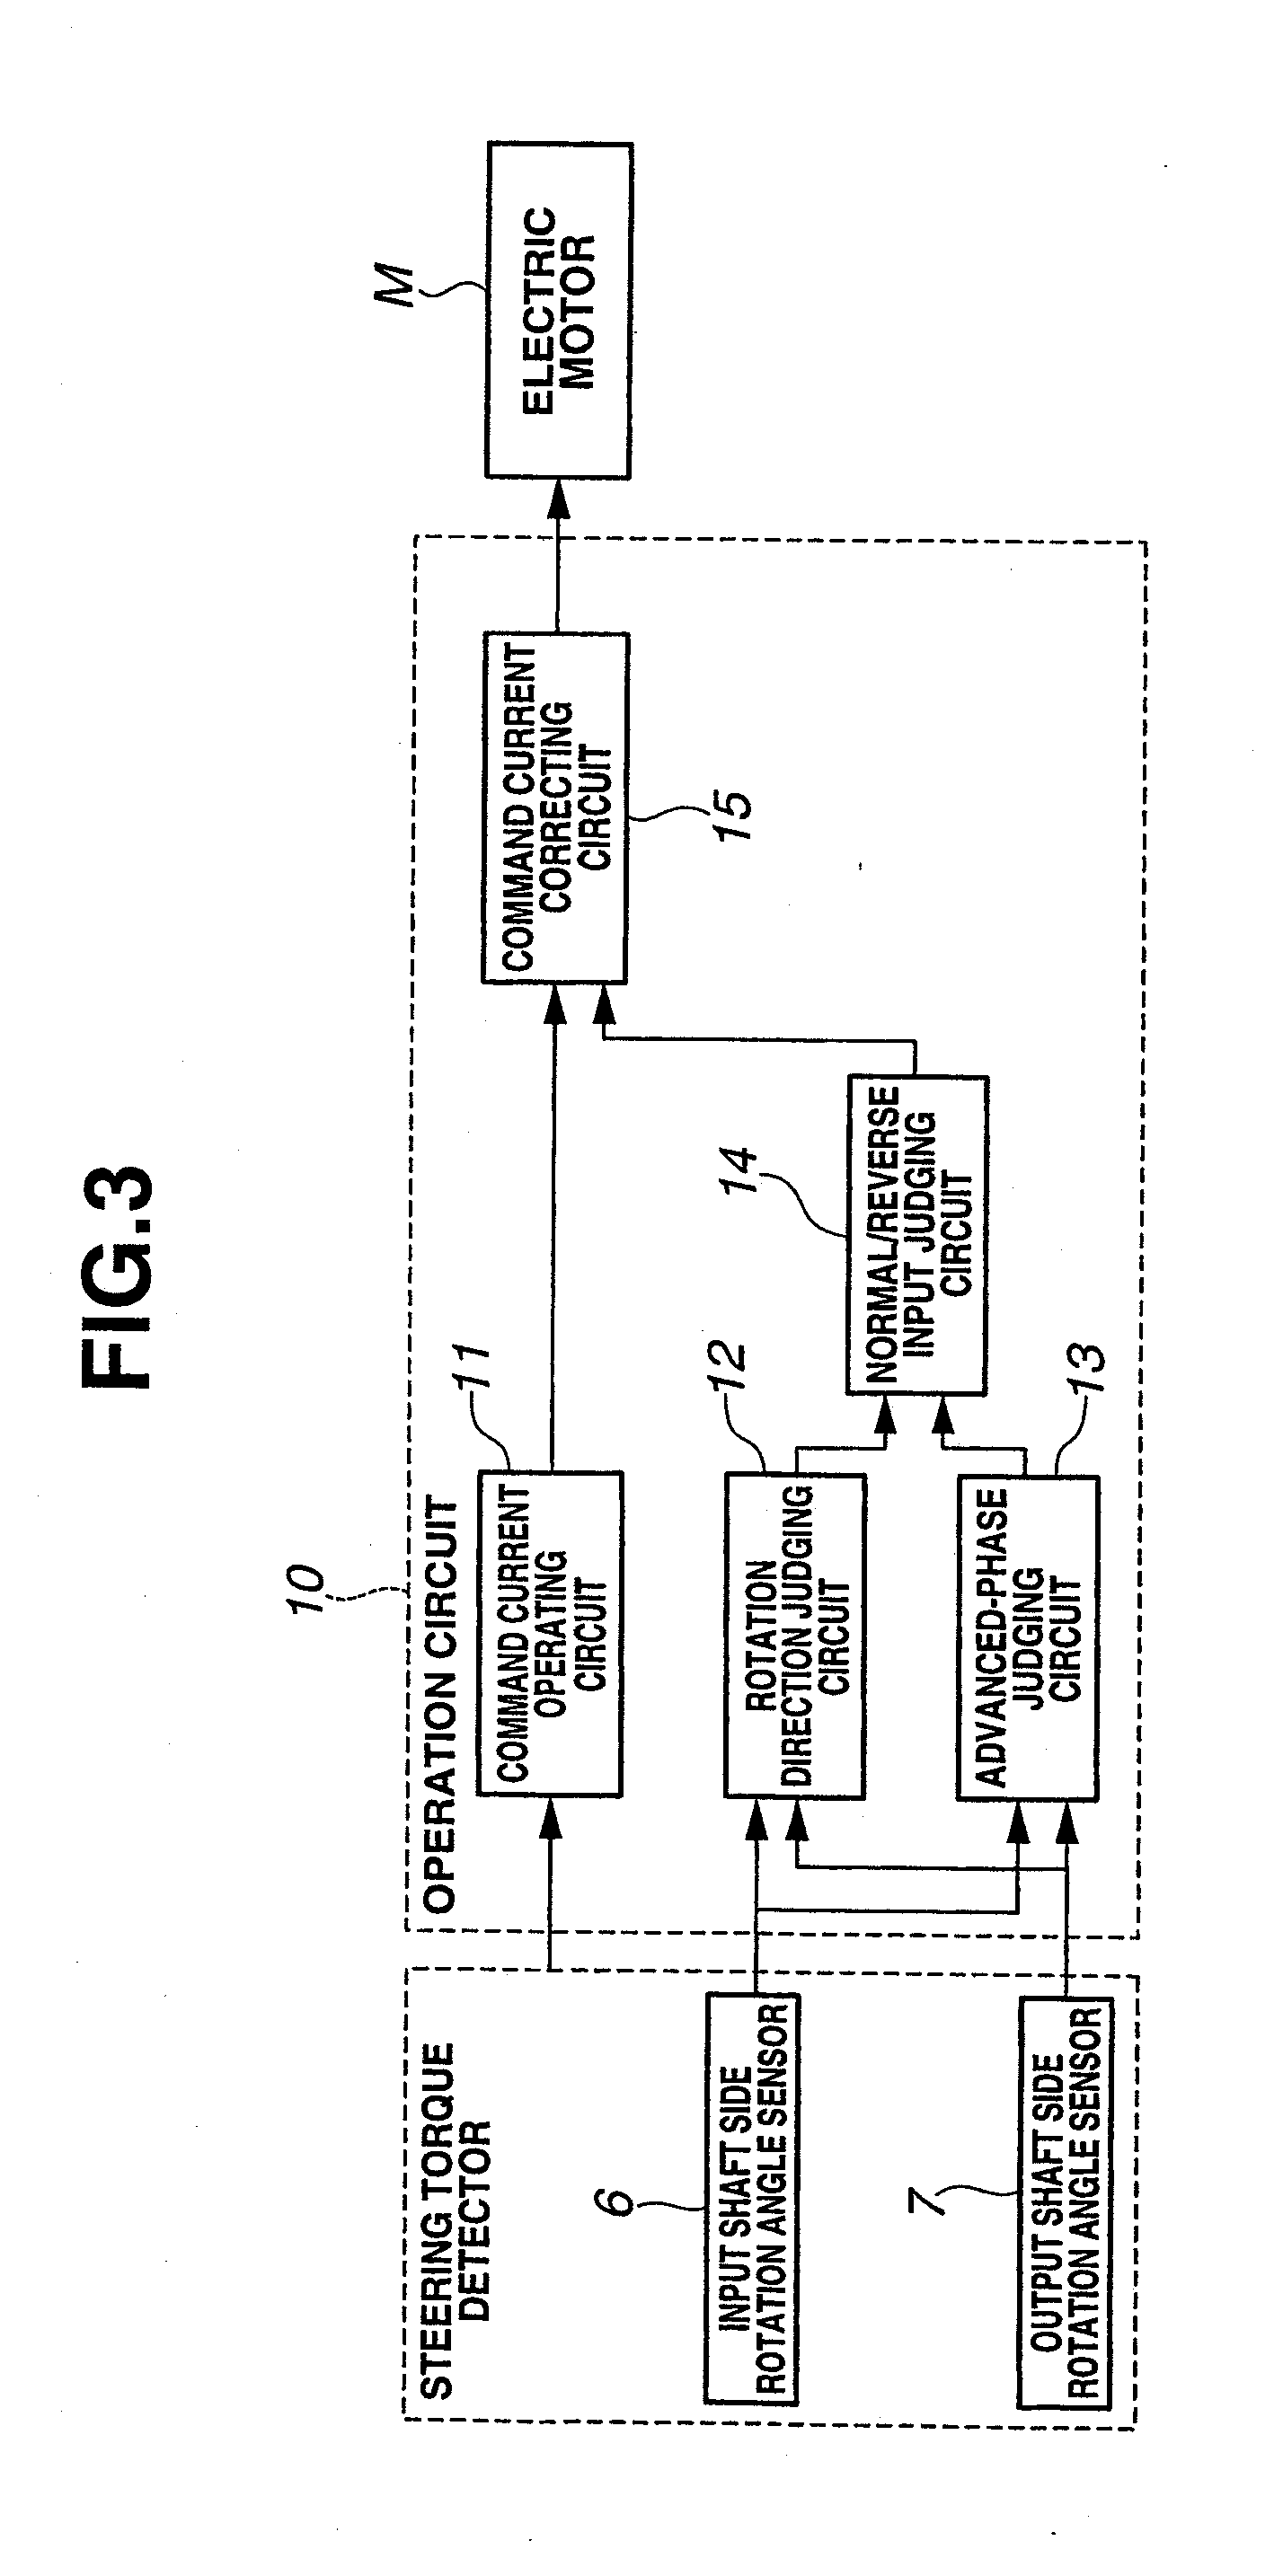 Electric power steering system and controller of the electric power steering system